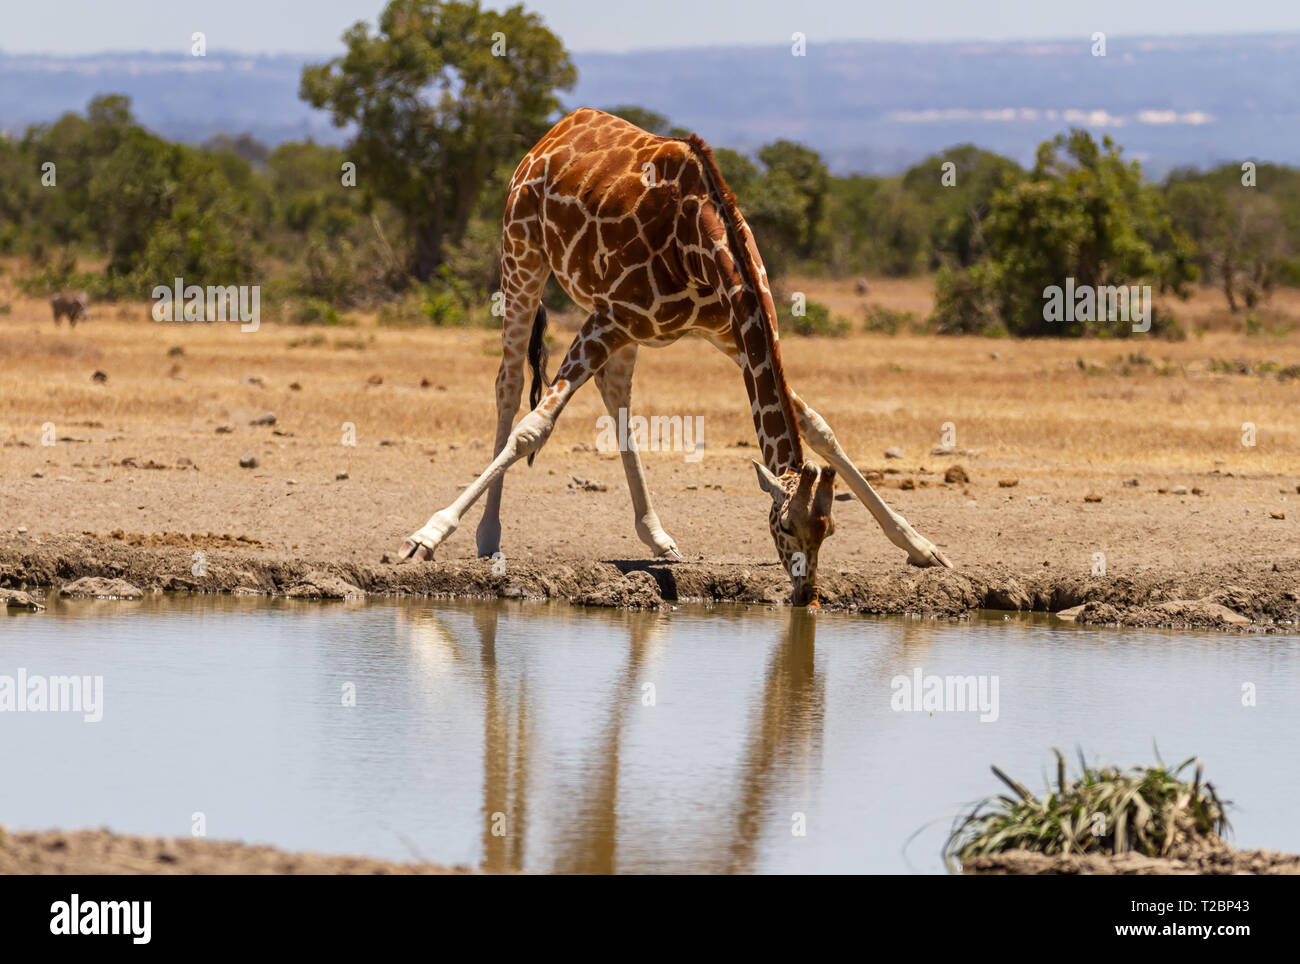 Reticulated giraffe, Giraffa camelopardalis reticulata, bends with legs stretched out to drink water. Ol Pejeta Conservancy, Kenya, Africa Stock Photo